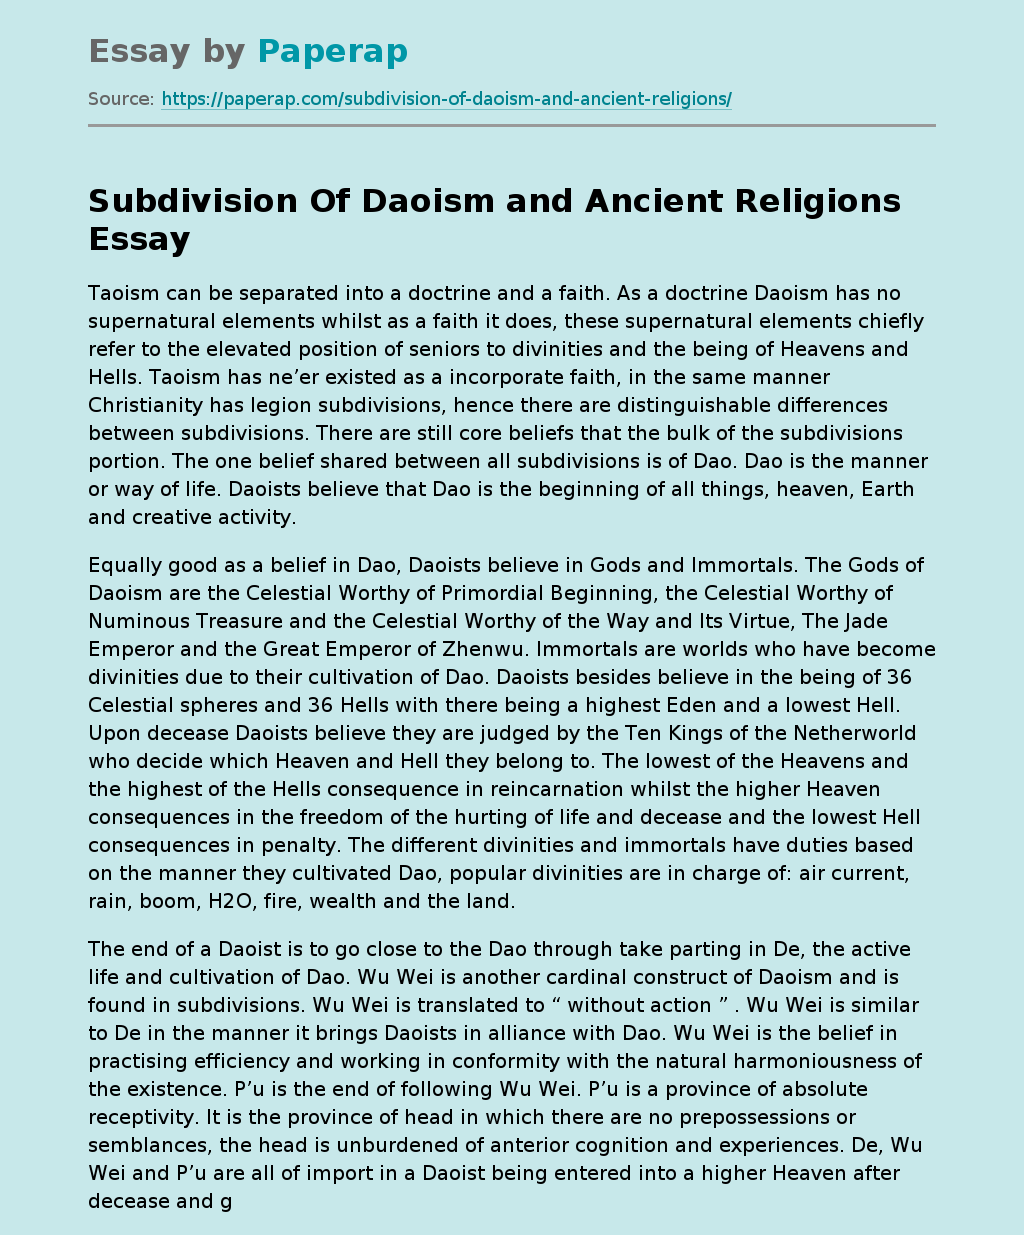 Subdivision Of Daoism and Ancient Religions